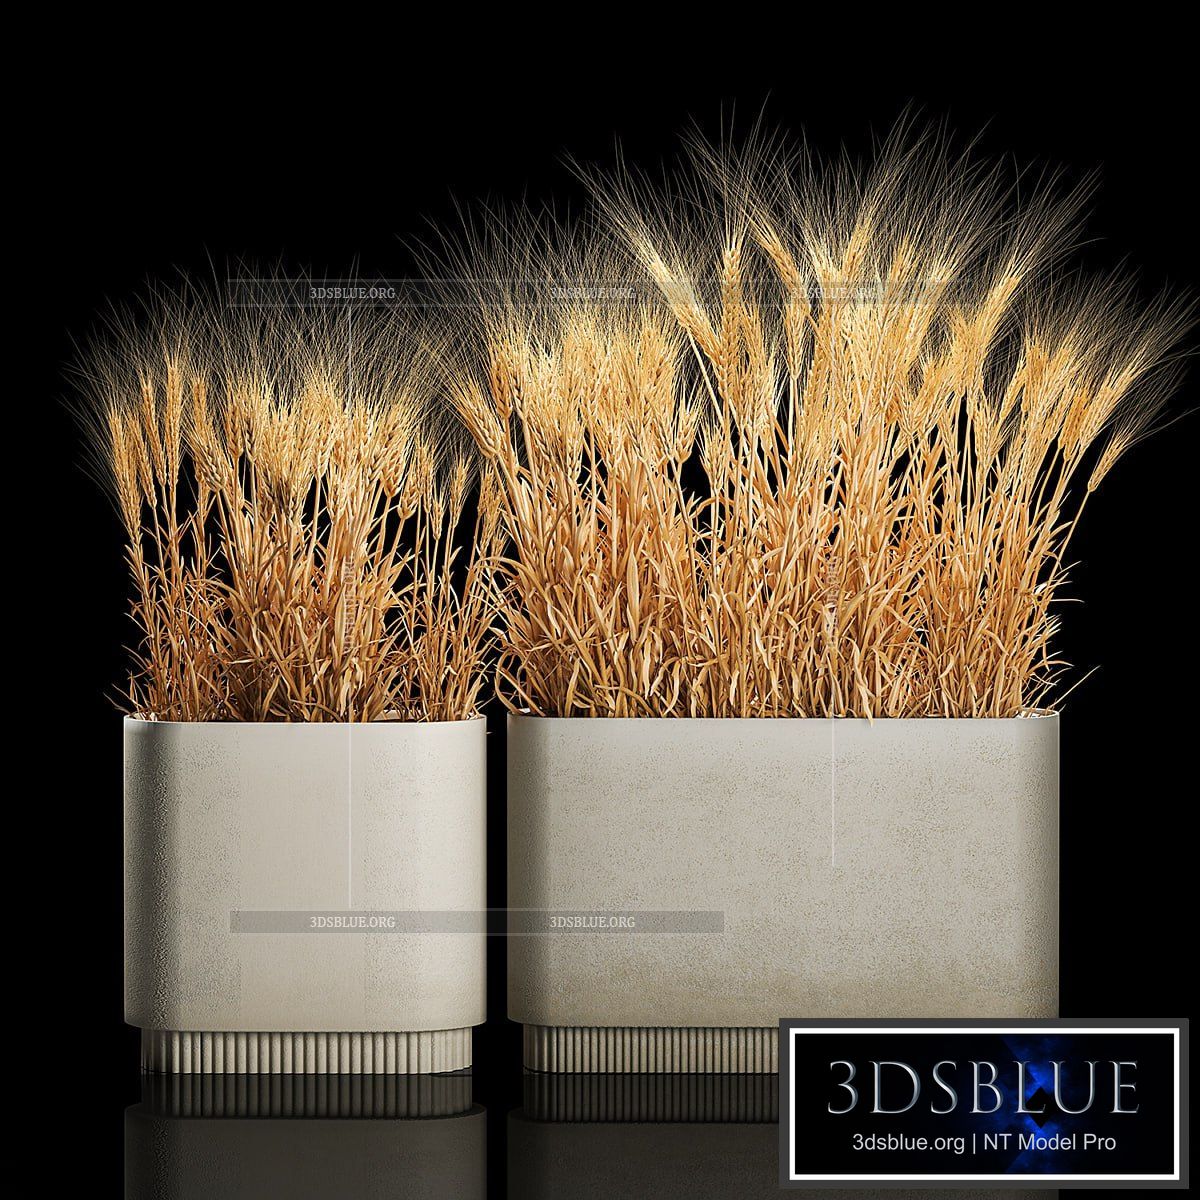 Bushes of spikelets of dry wheat in flowerpots dried flowers eco style. Plant collection 1204